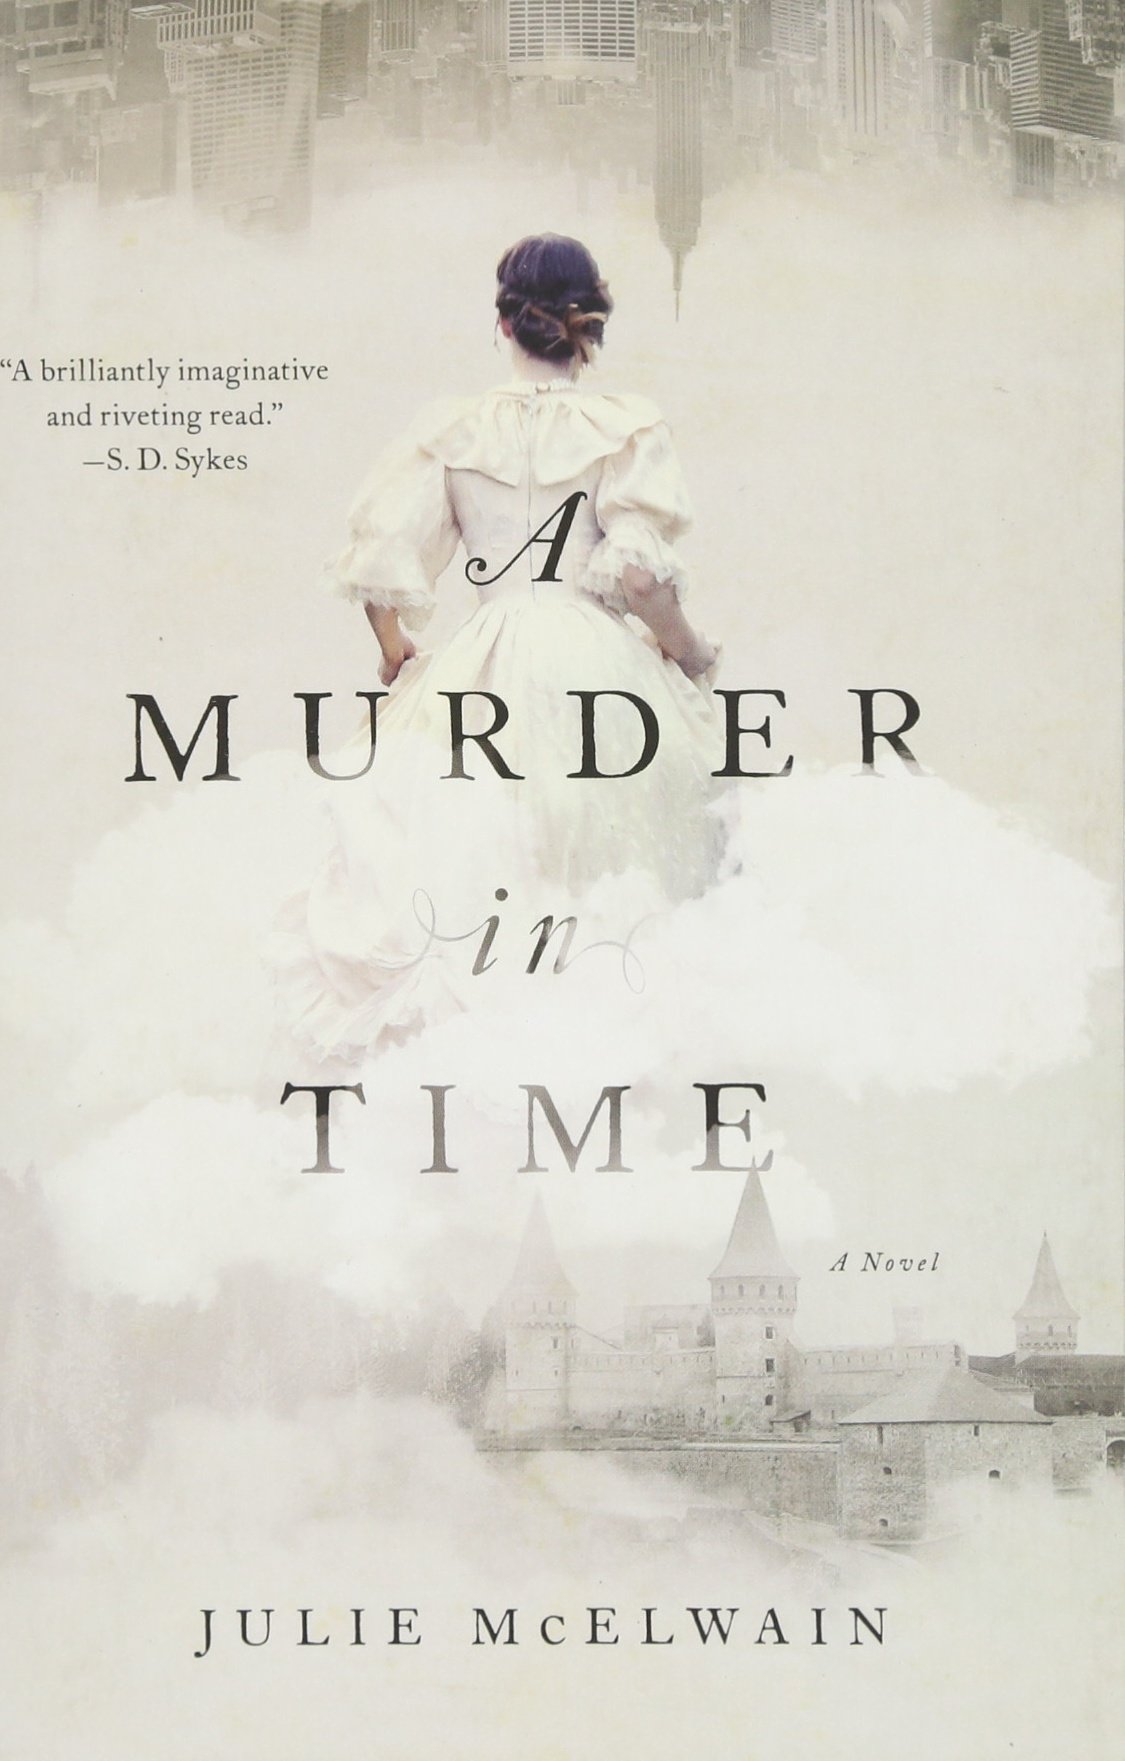 View description for 'A Murder in Time'